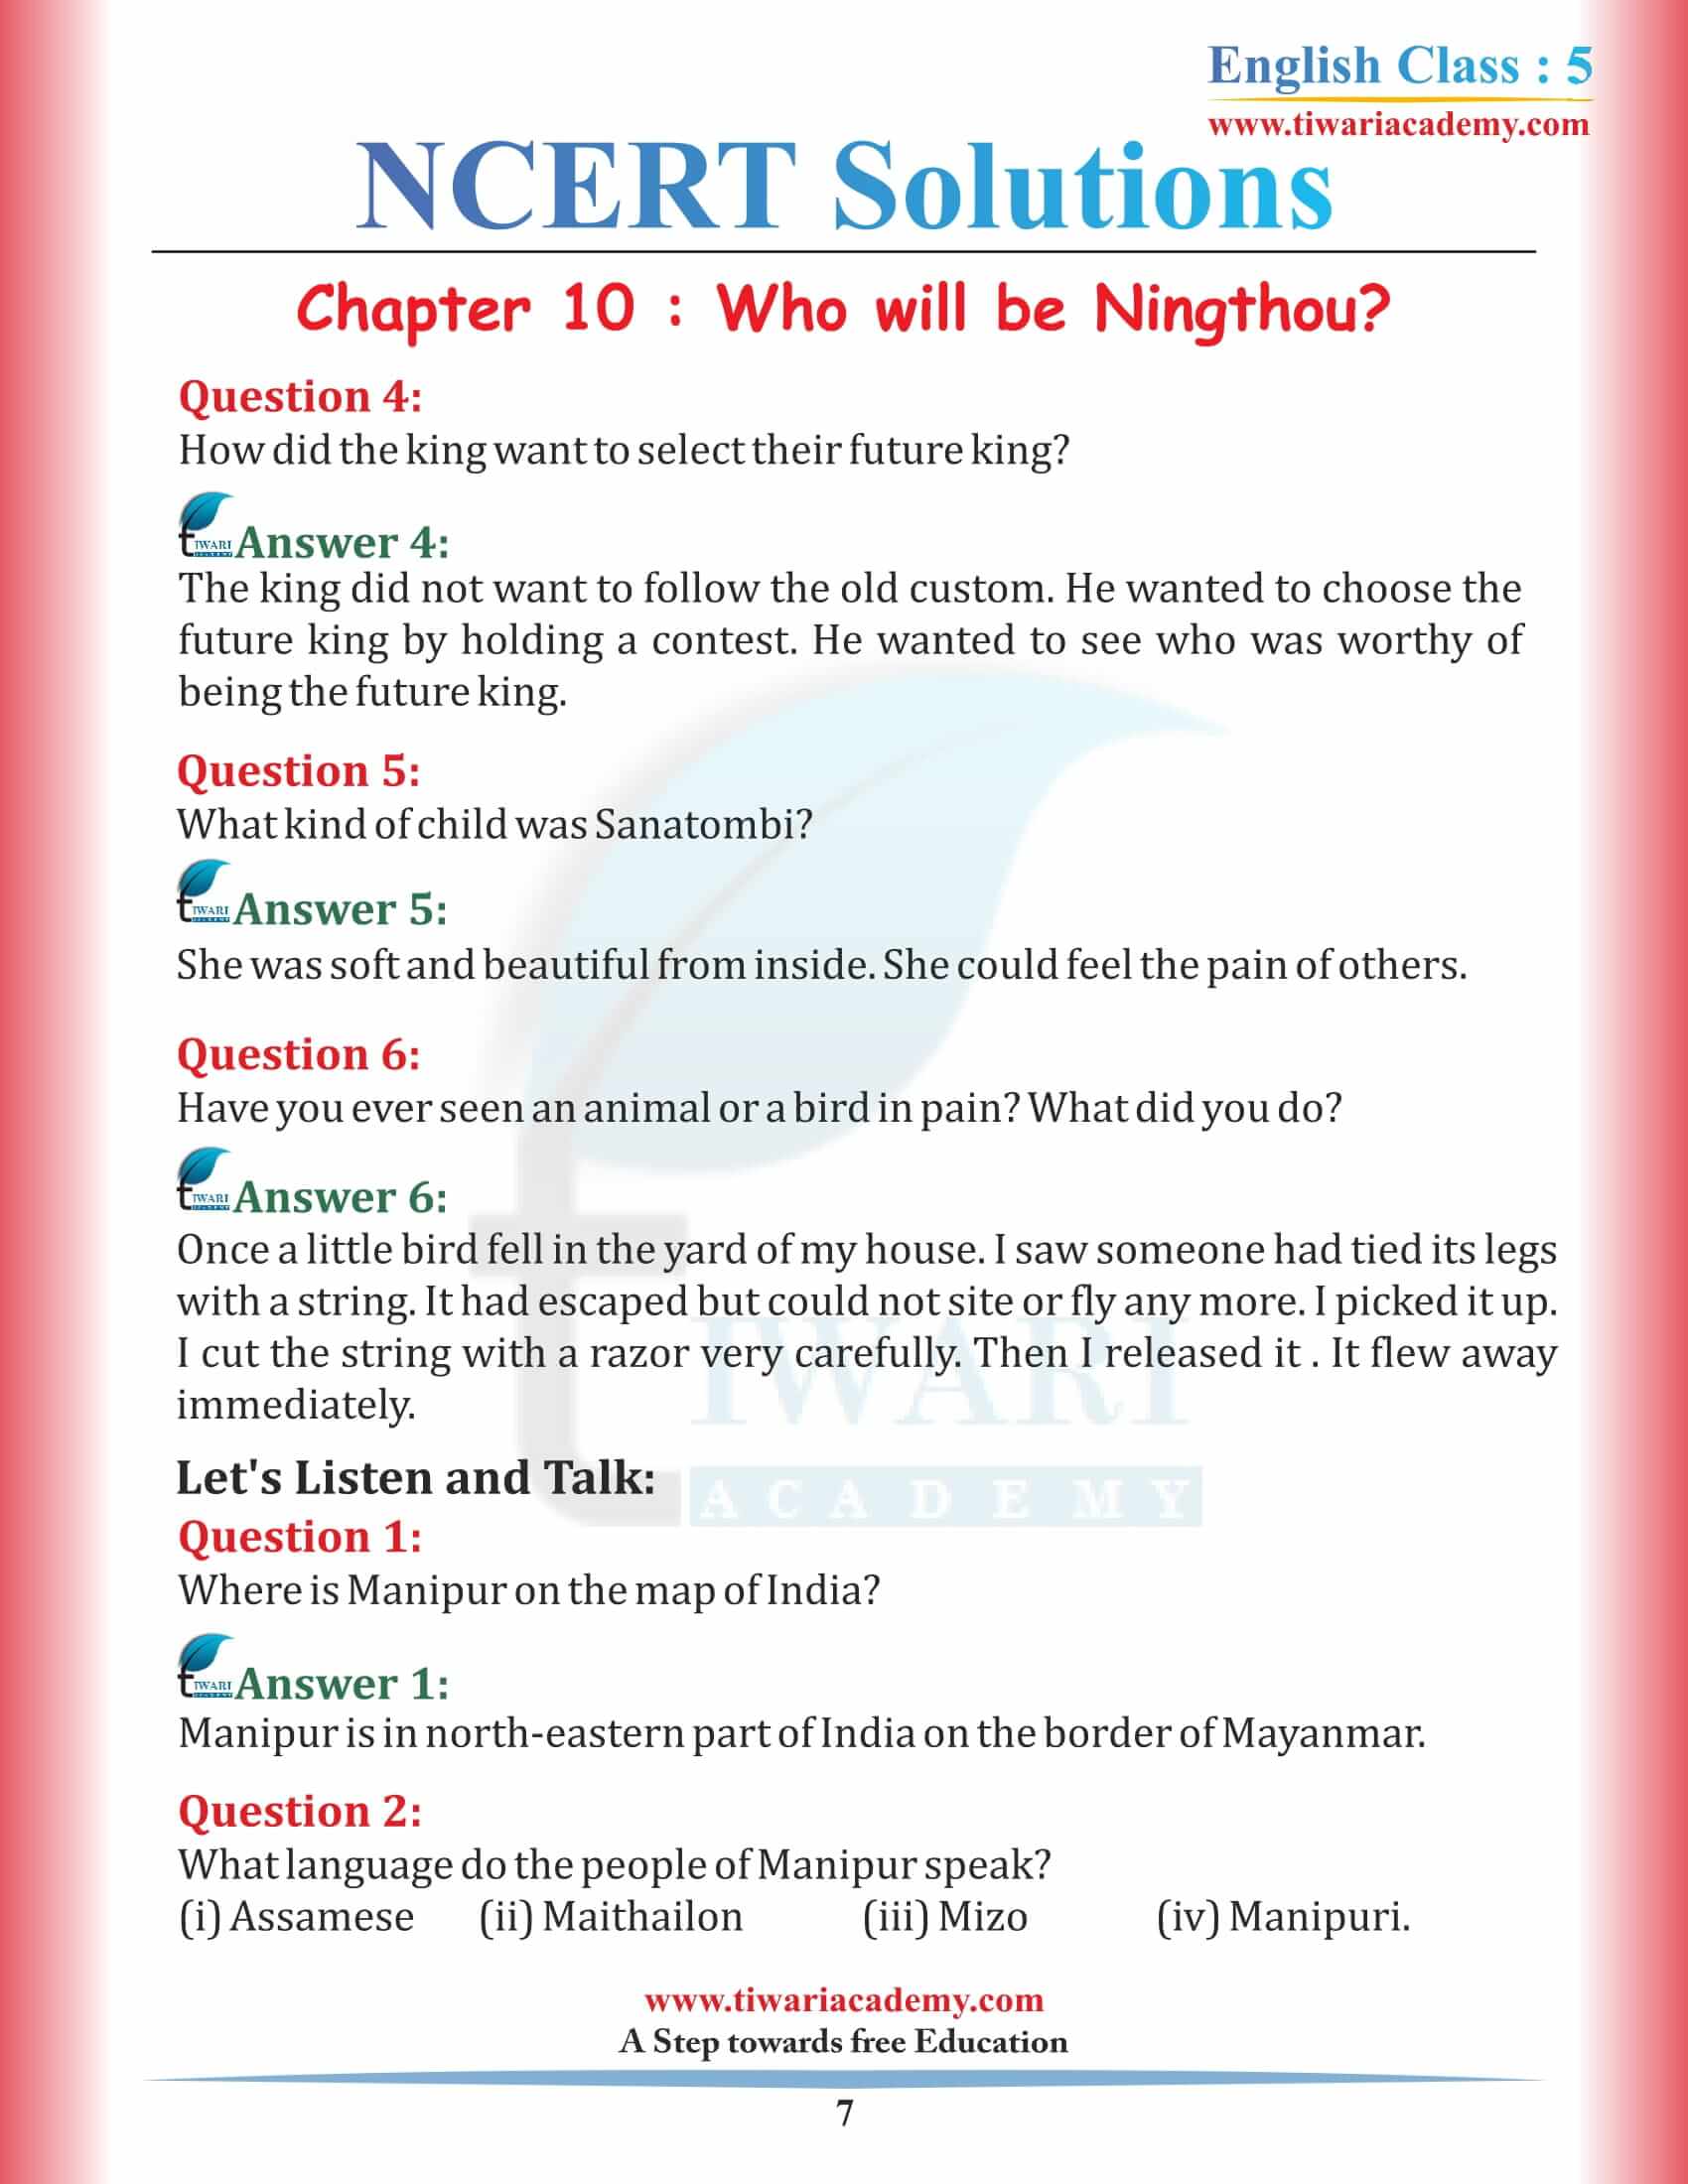 NCERT Solutions for Class 5 English Chapter 10 Who Will be Ningthou?